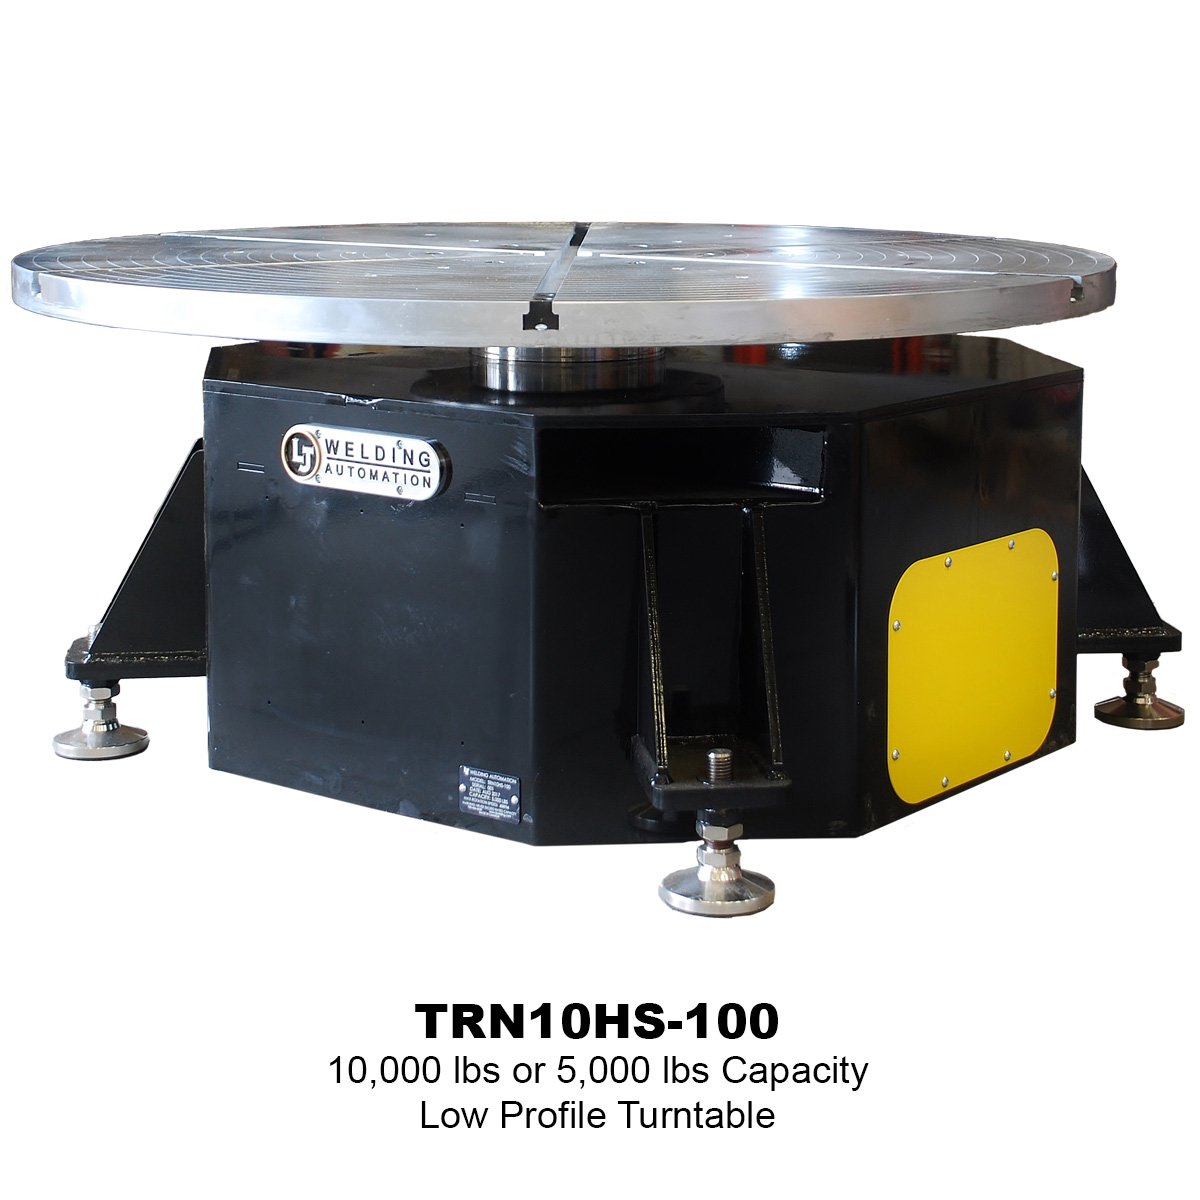 01-10000lb-or-5000lb-Low-Profile-Turntable